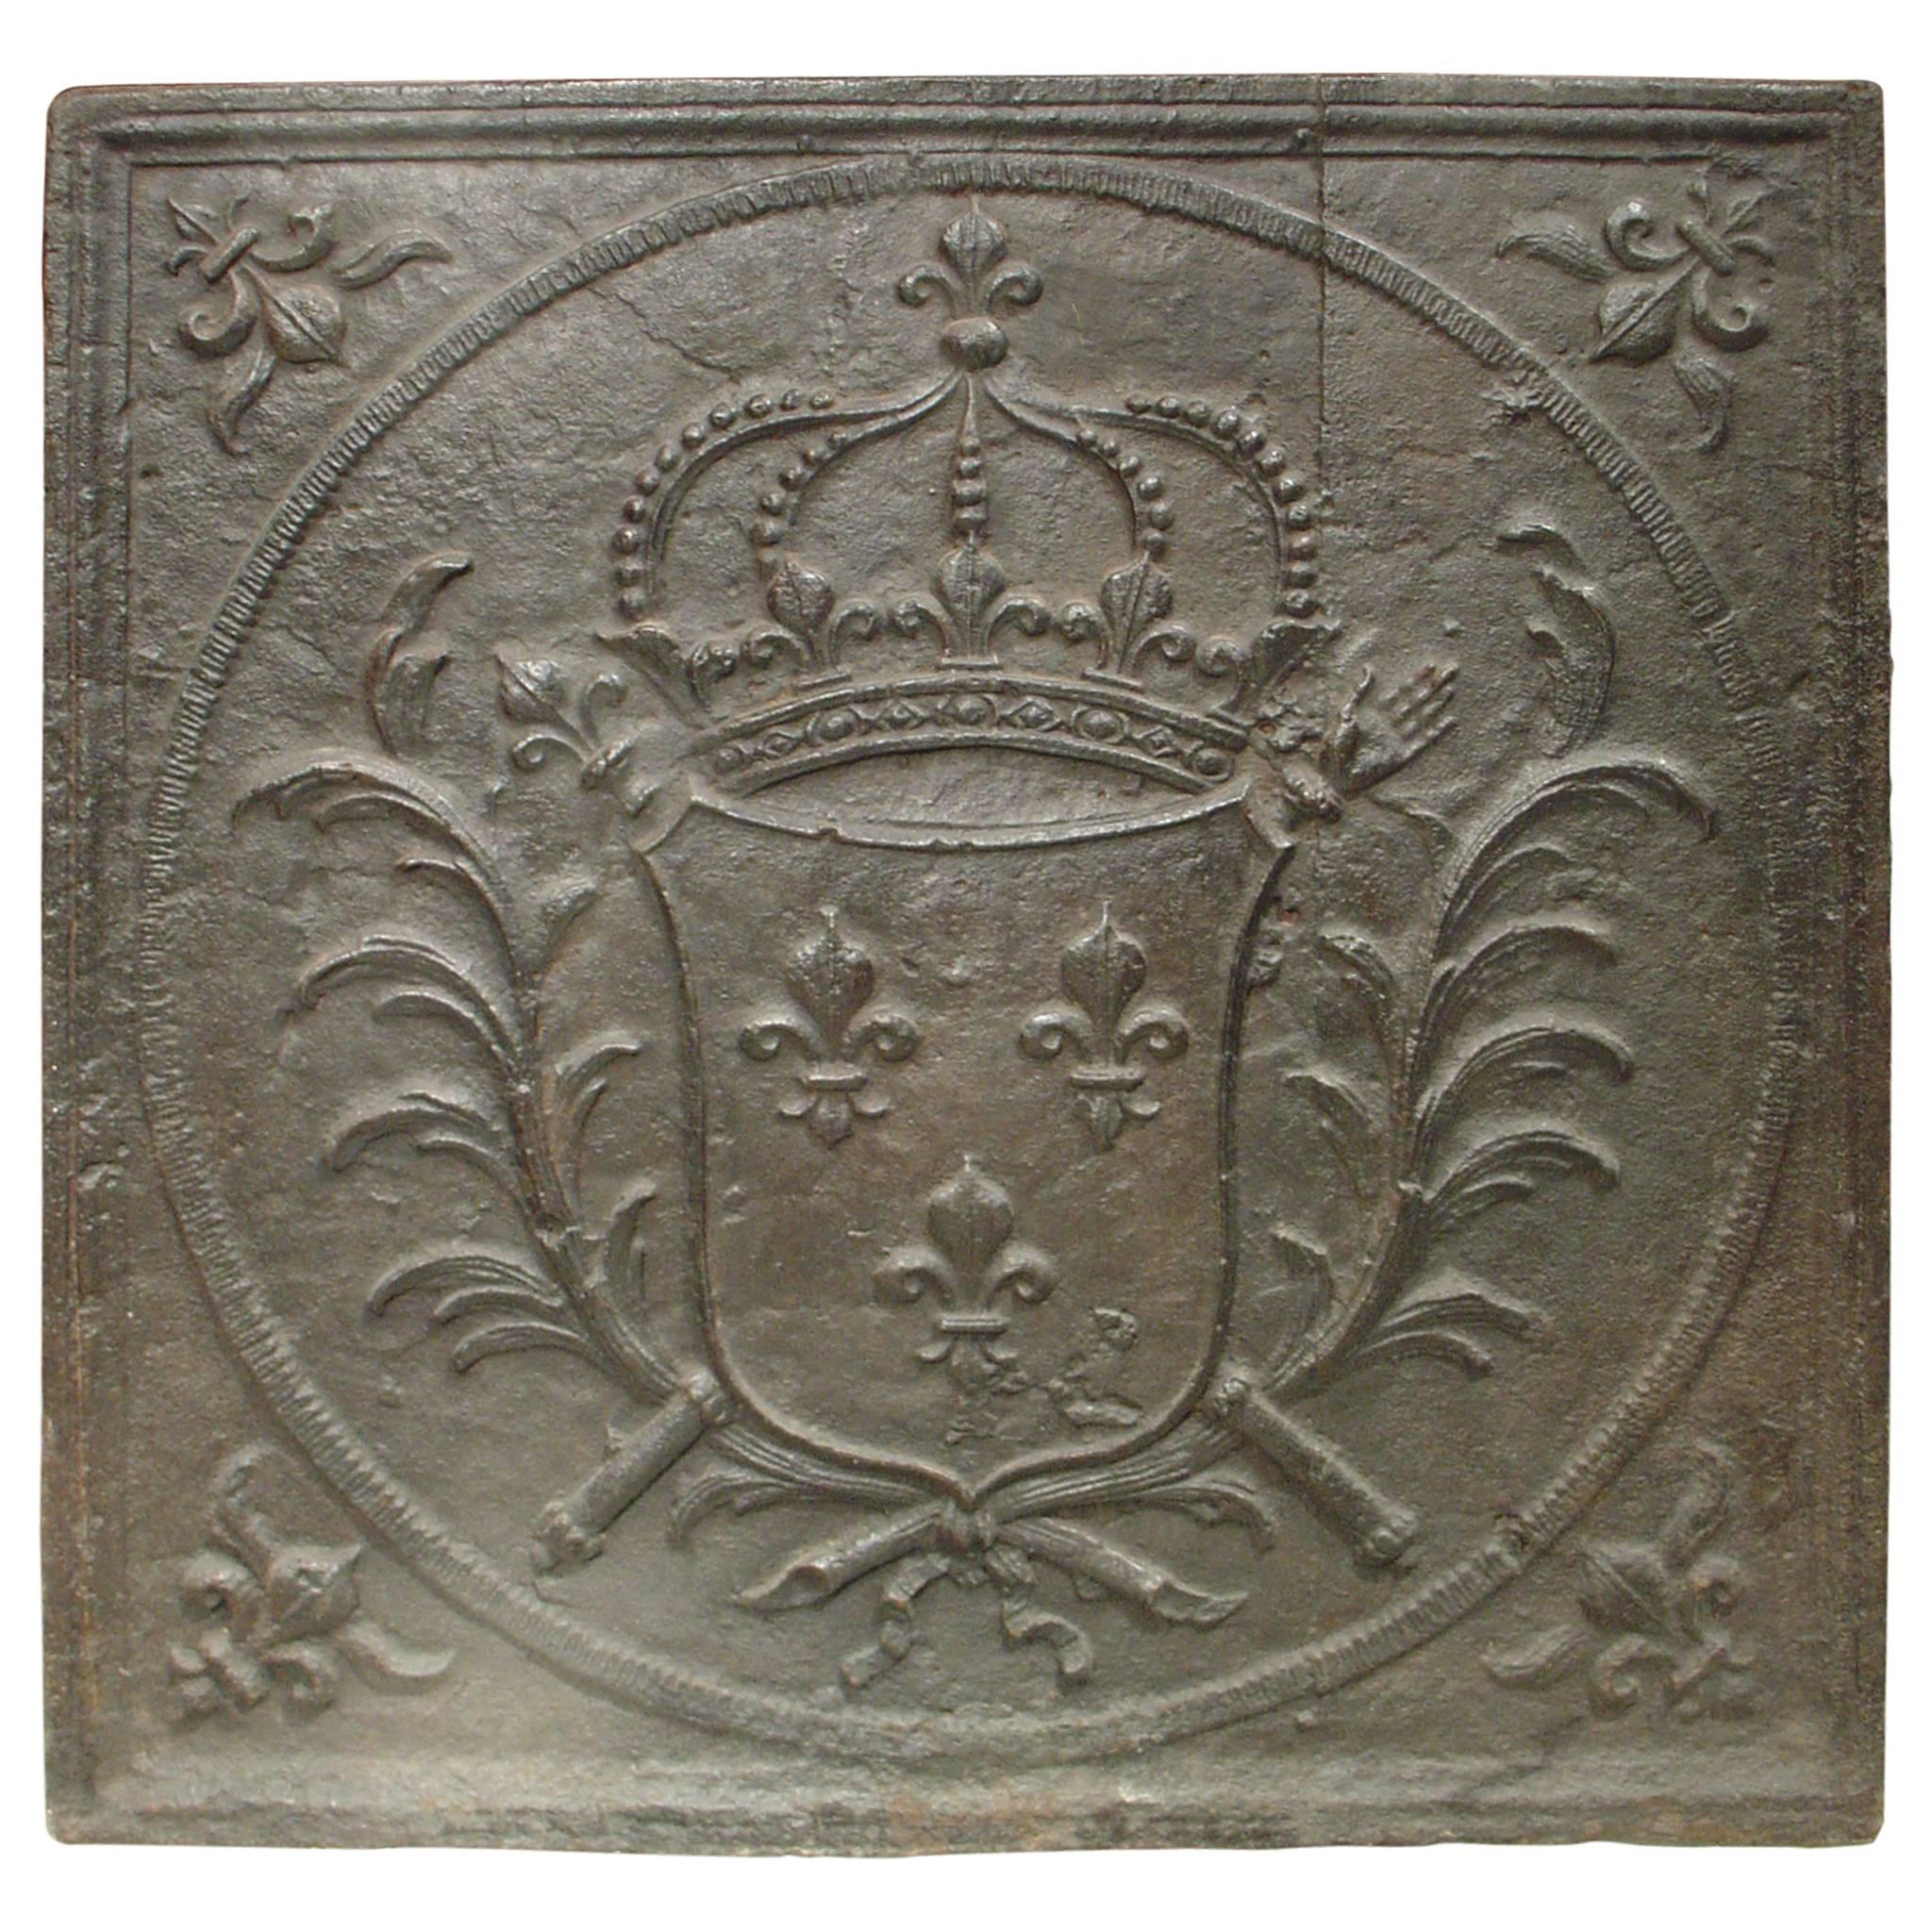 Large 18th Century Coat of Arms Fireback from France